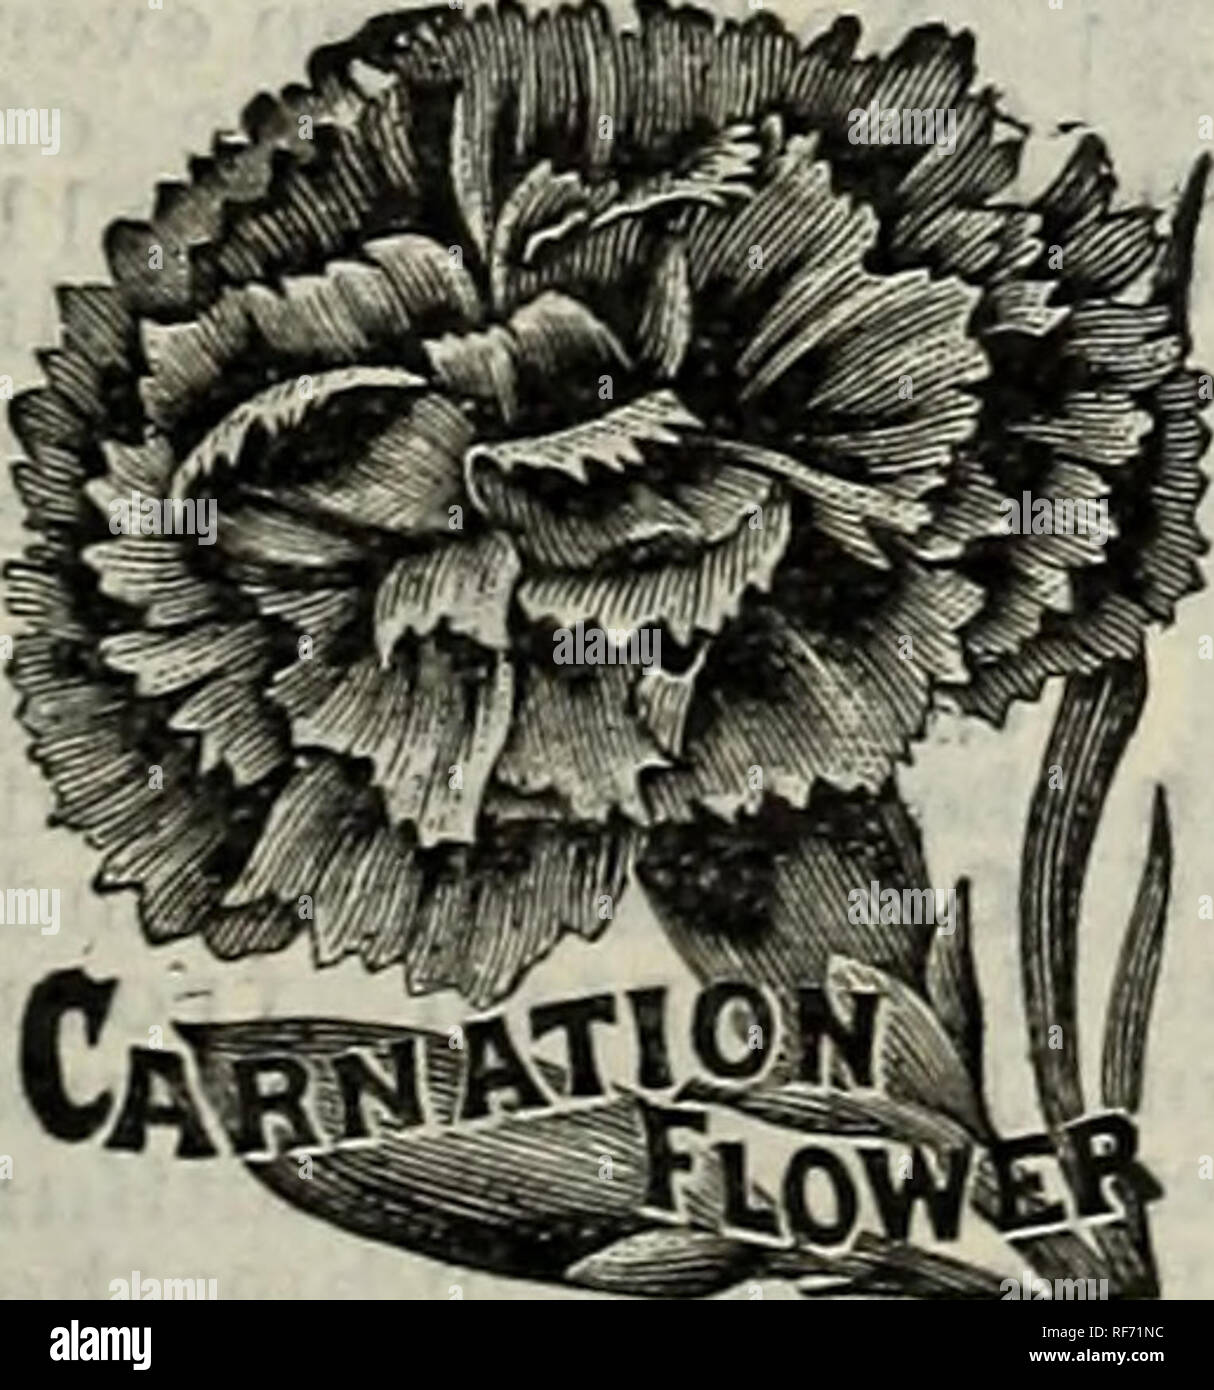 . Seeds, plants, bulbs, fruits. Nursery stock New York (State) Catalogs; Flowers Seeds Catalogs; Plants, Ornamental Catalogs. 'e&lt;w Gta.nt Imperial Centaurea* (Centaurea Imperialis.) This magnificent new Giant Centaurea is a rapid, easy- grower, soon making a large plant. The flower stems are long, the flowers large and very sweet scented. This new Centaurea, a cross between C. Moschata and Margaret, represents the best that has been produced in these beautiful summer-blooming plants. The bushes are about 4 feet high, of enormous dimensions and are covered with large, beautiful flowers of th Stock Photo